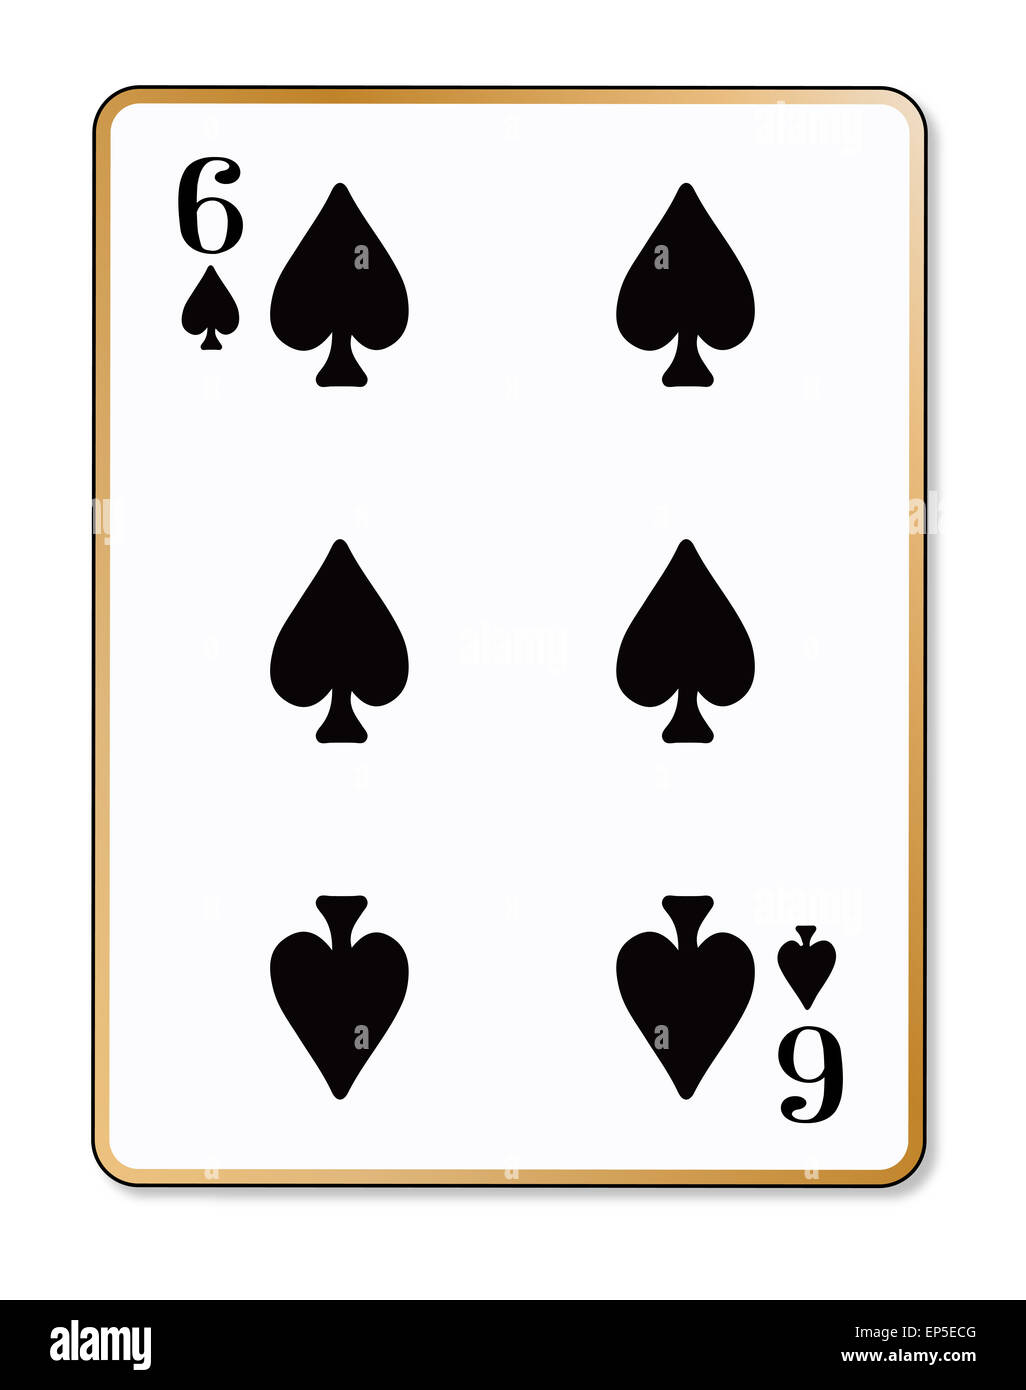 The playing card the Six of spades over a white background Stock Photo